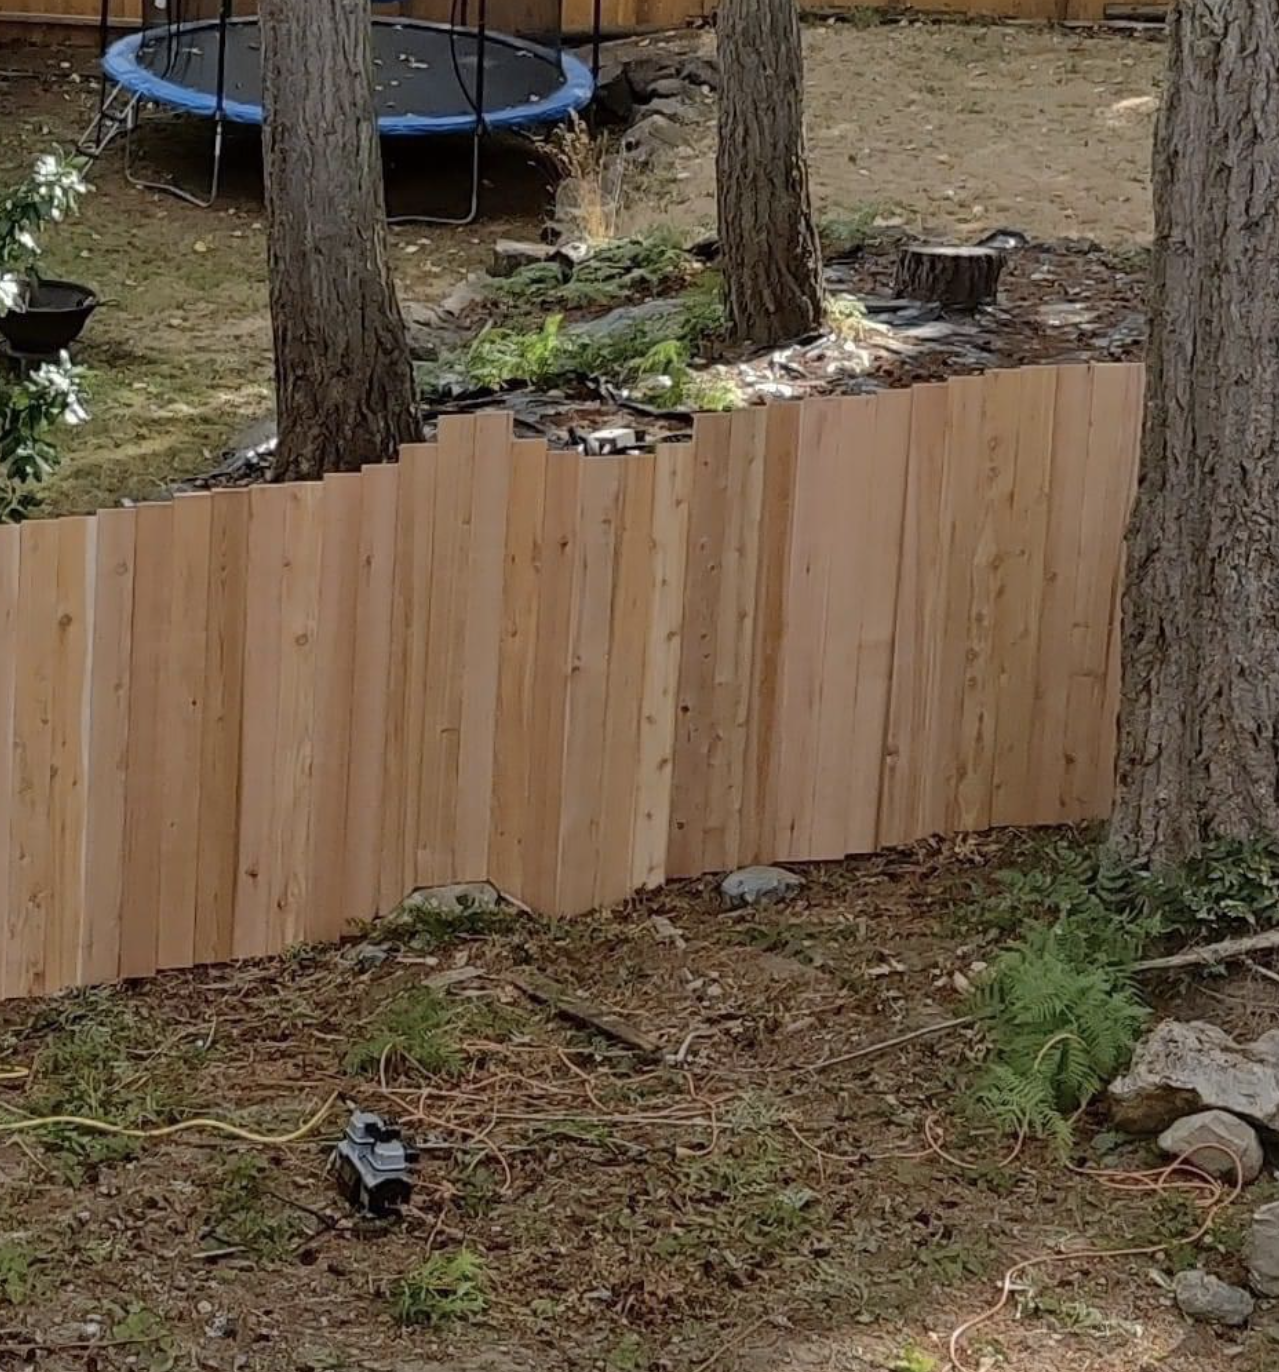 An uneven wooden fence has been put up